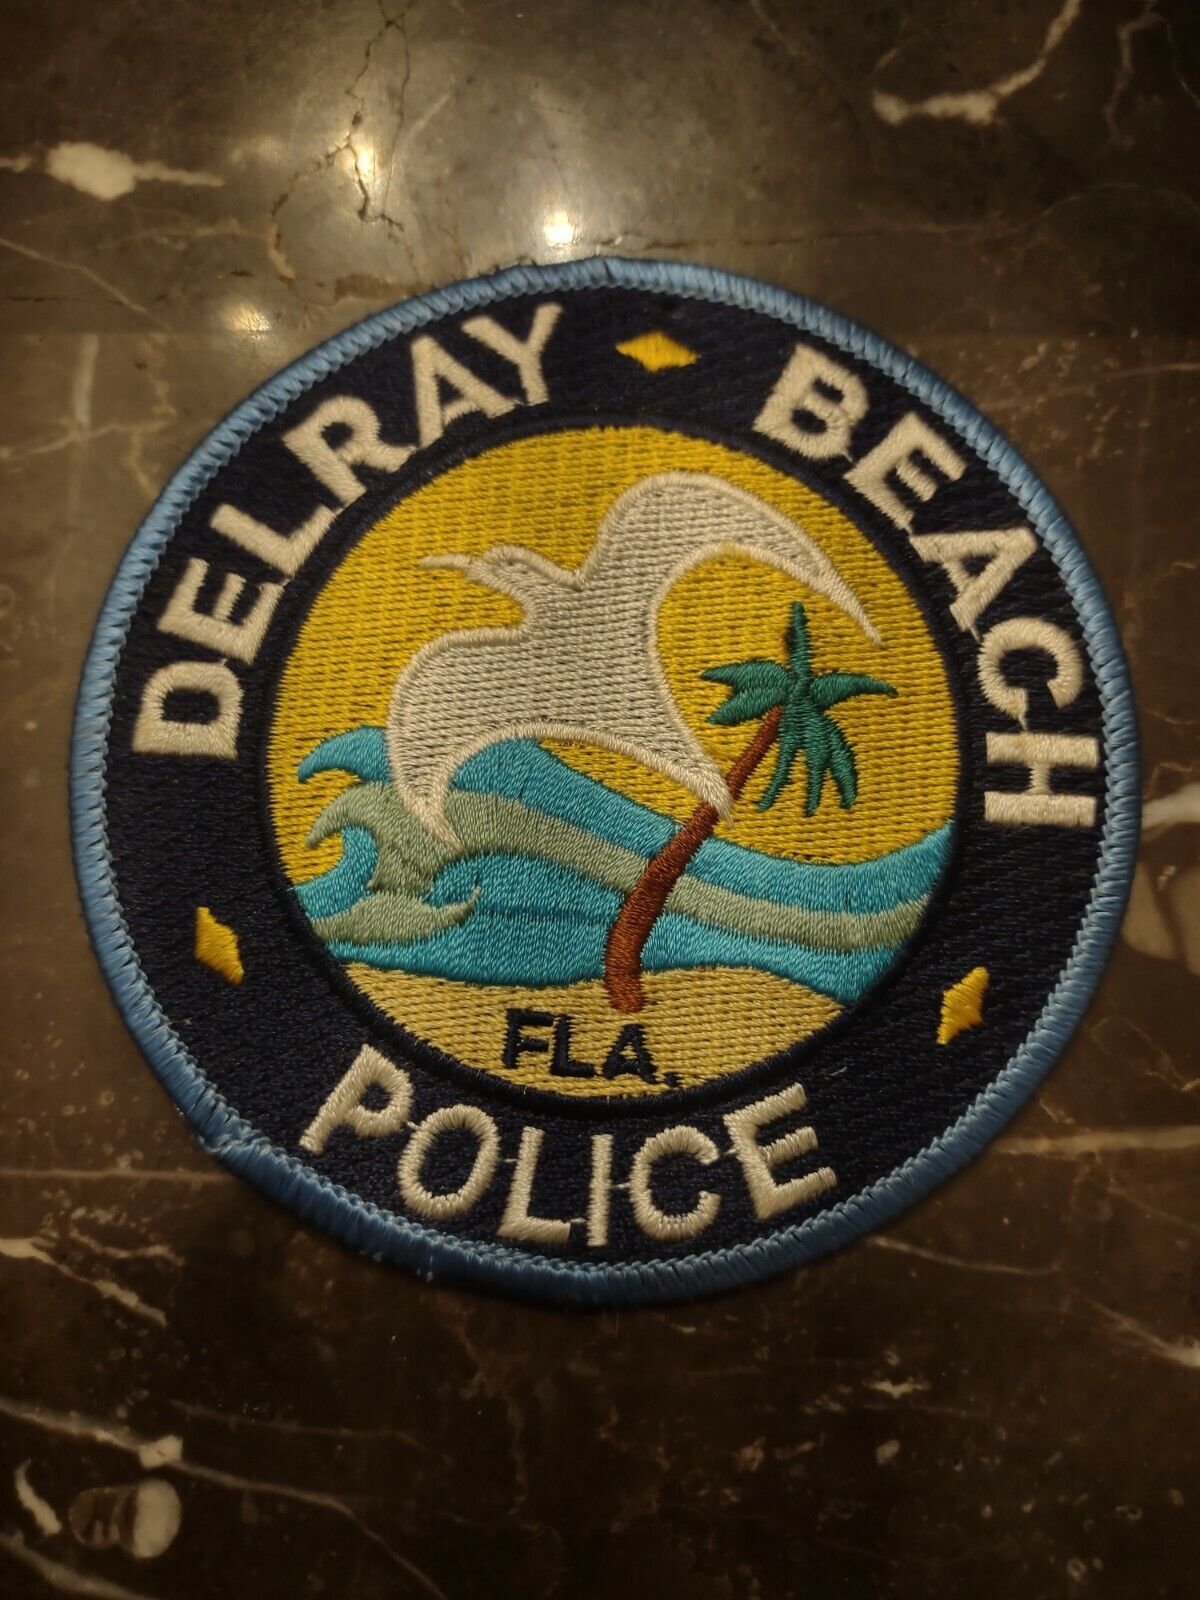 Delray Beach FL Police Patch Excellent Condition